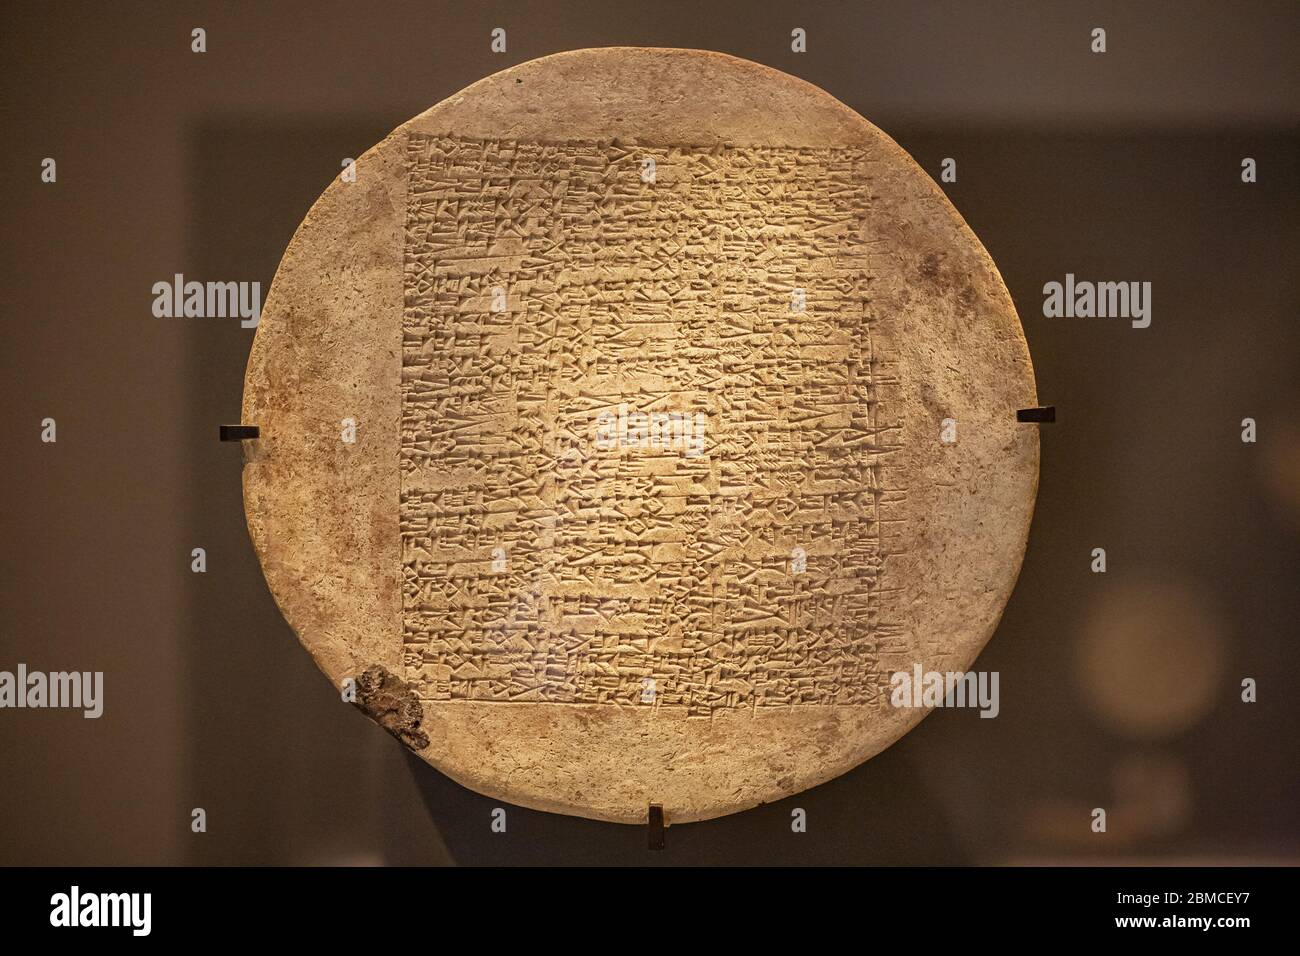 Ancient cuneiform script from Mari from around 1800 BC exhibited in the Louvre, Paris Stock Photo